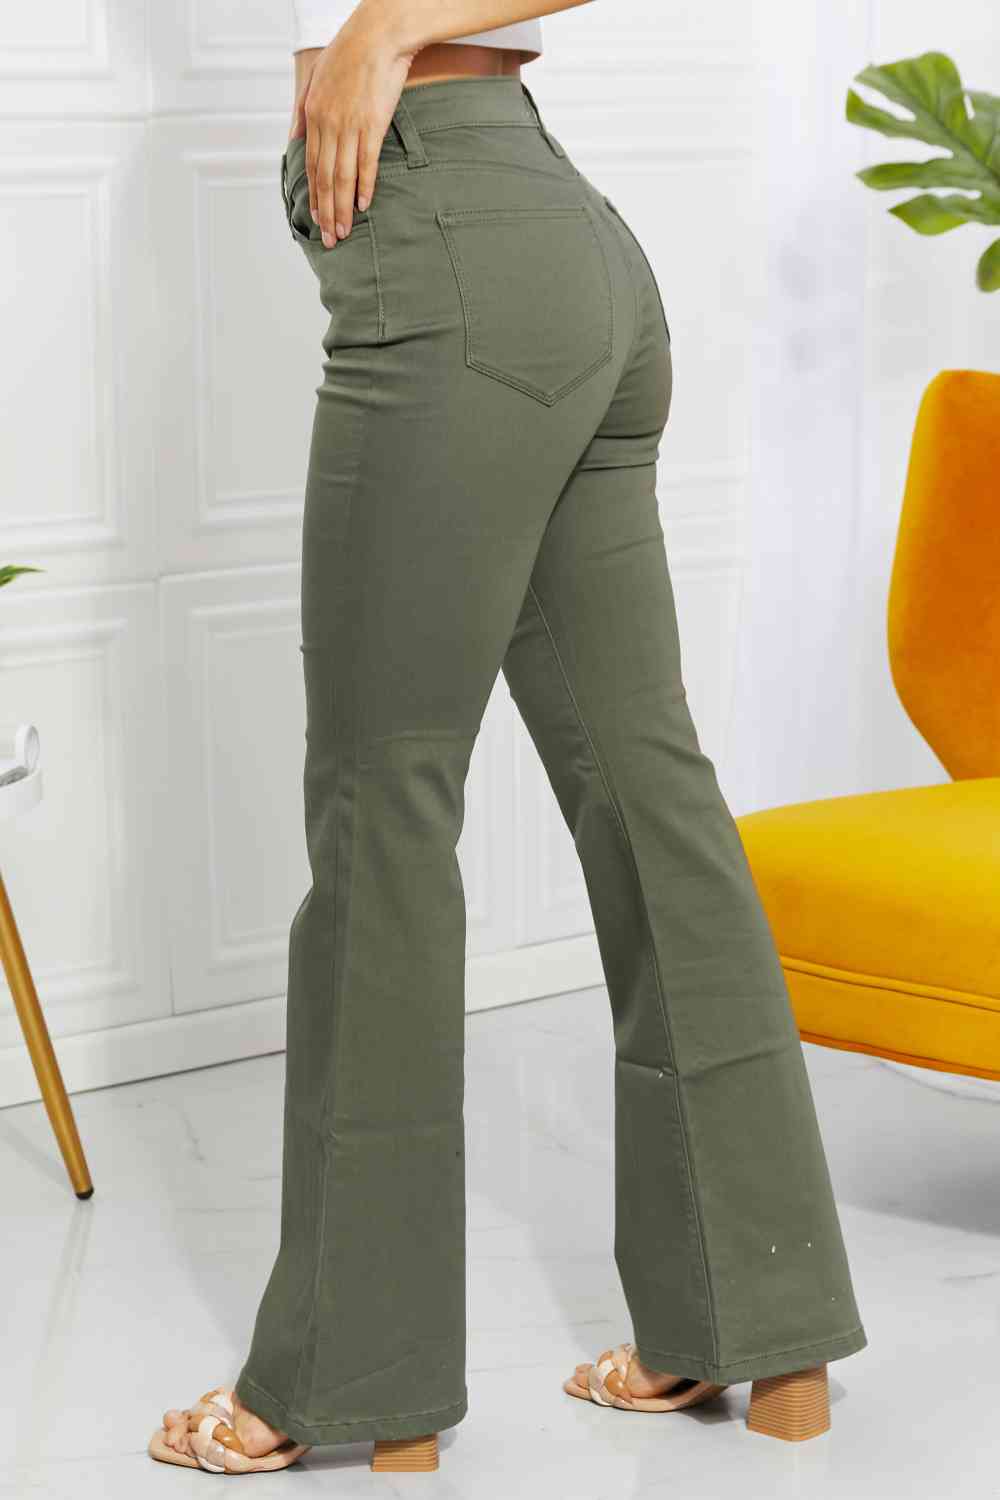 Zenana Clementine Full Size High-Rise Bootcut Jeans in Olive